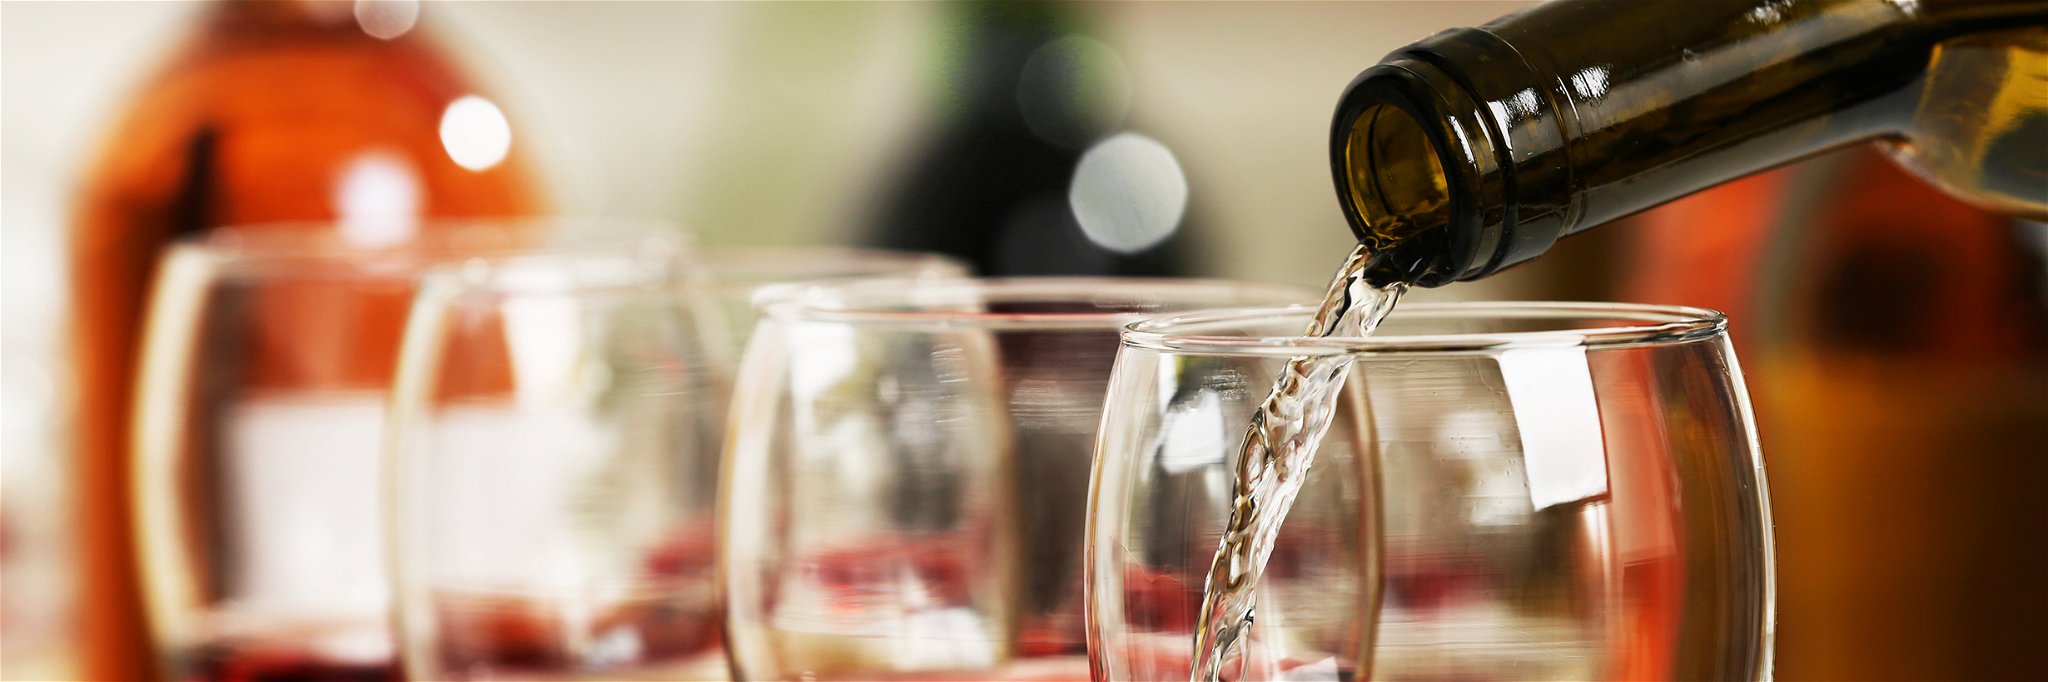 Passengers will enjoy a guided eight-step wine-tasting on board.